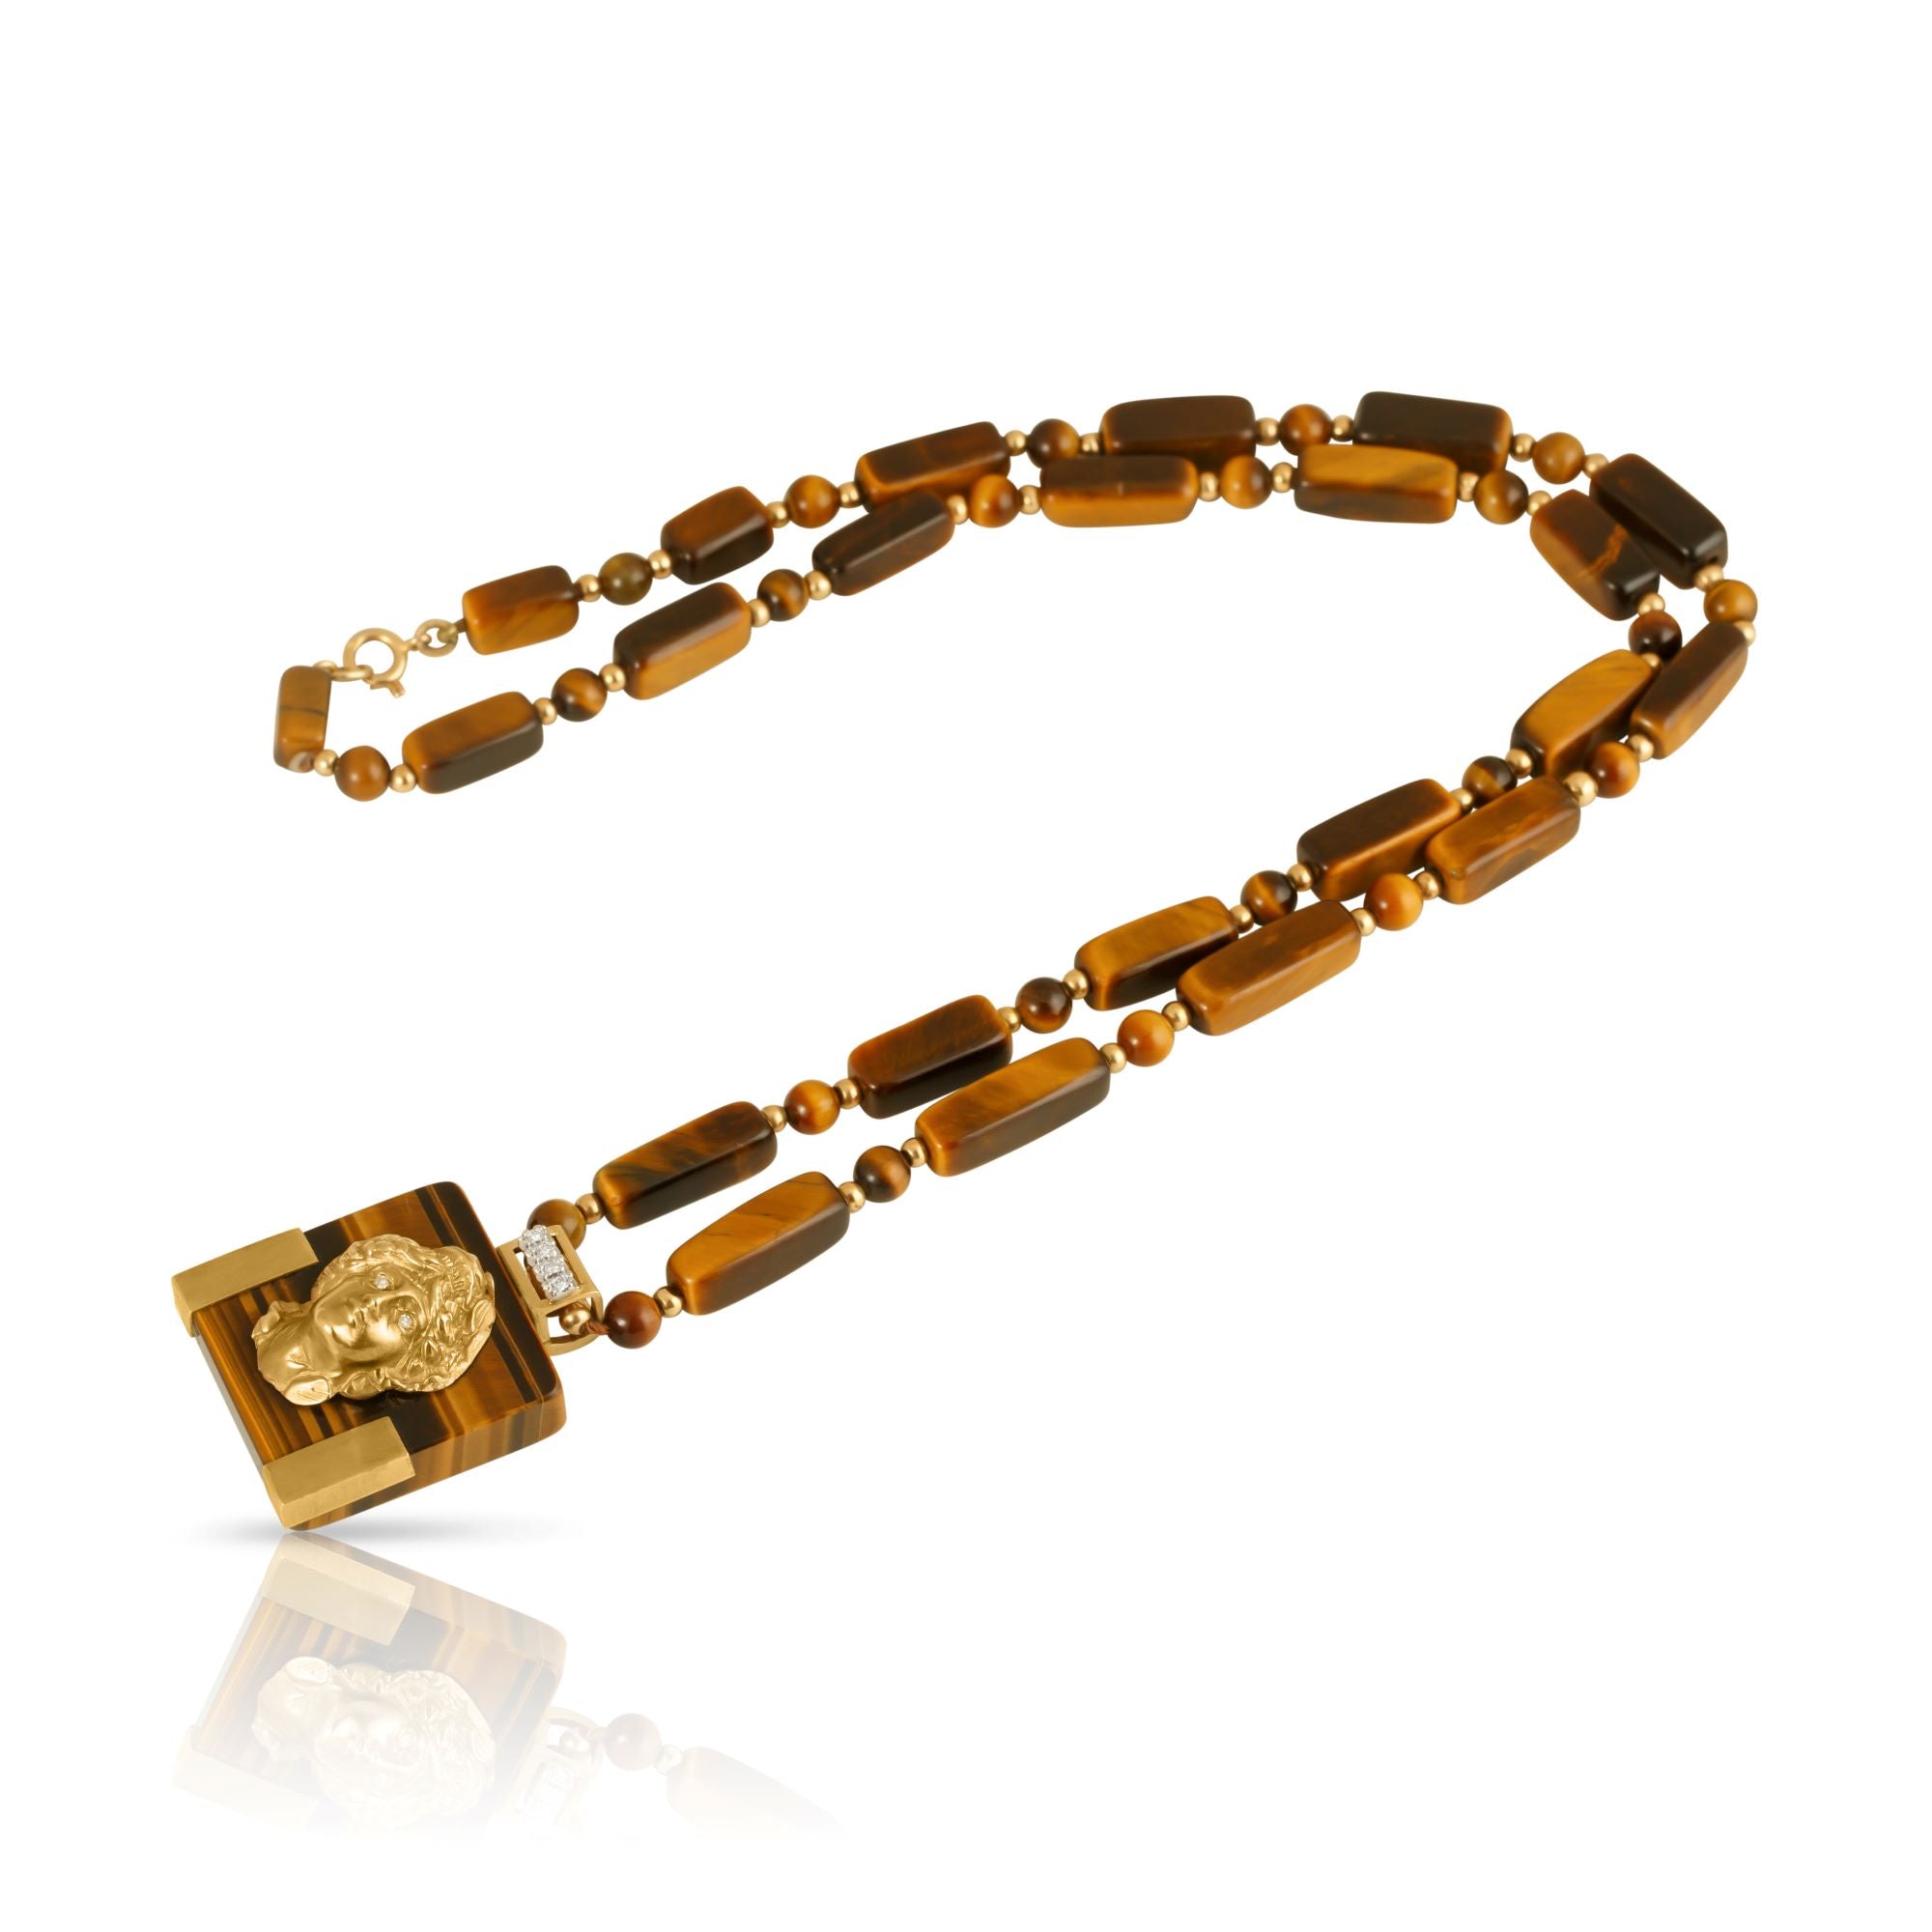 Tiger eye necklace with 14ct gold female portrait pendant.